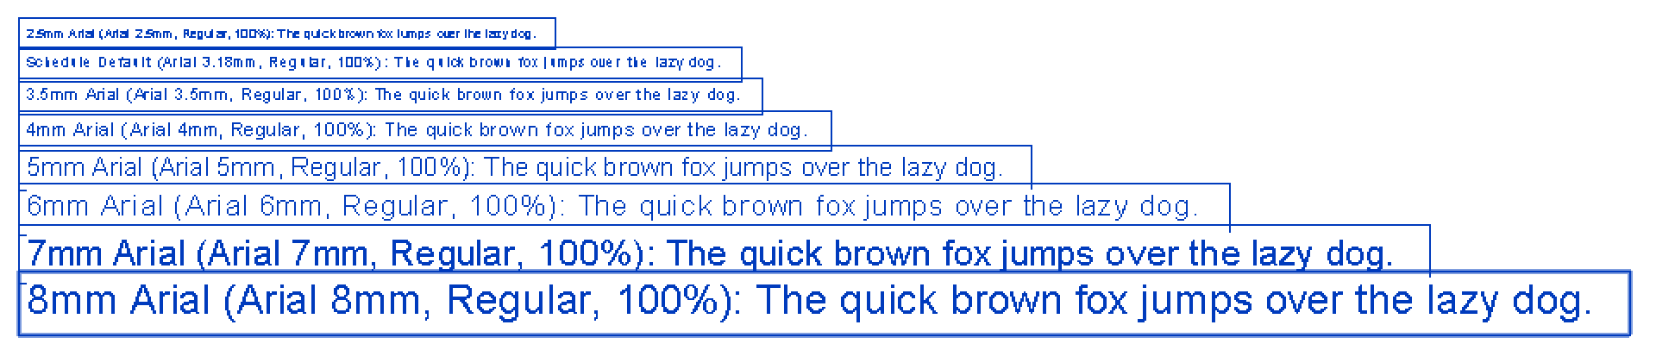 Text note width using Graphics.MeasureString